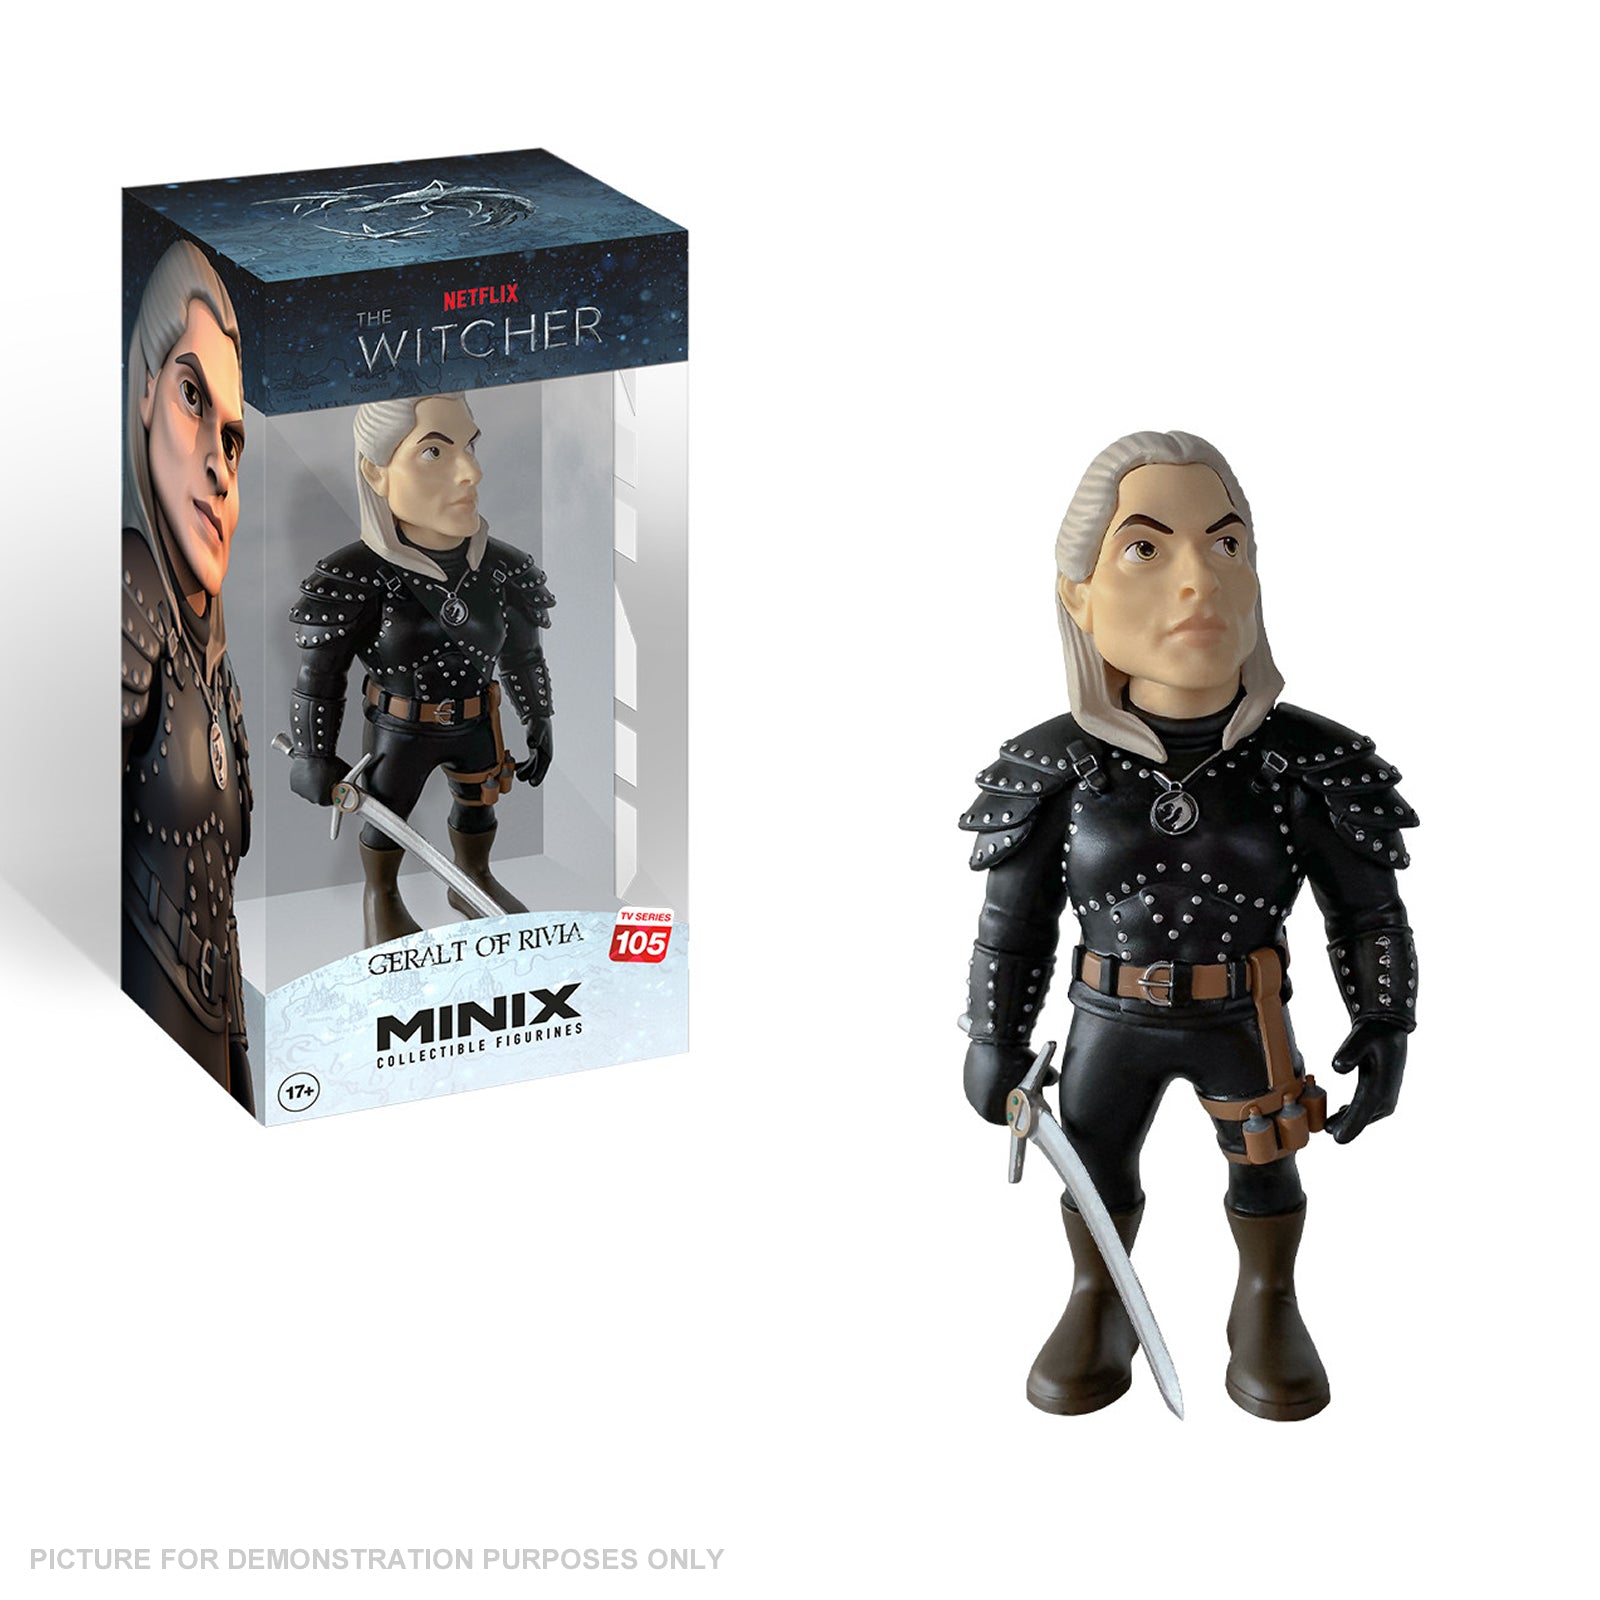 MINIX Collectable Figurine - GERALT OF RIVIA - The Witcher